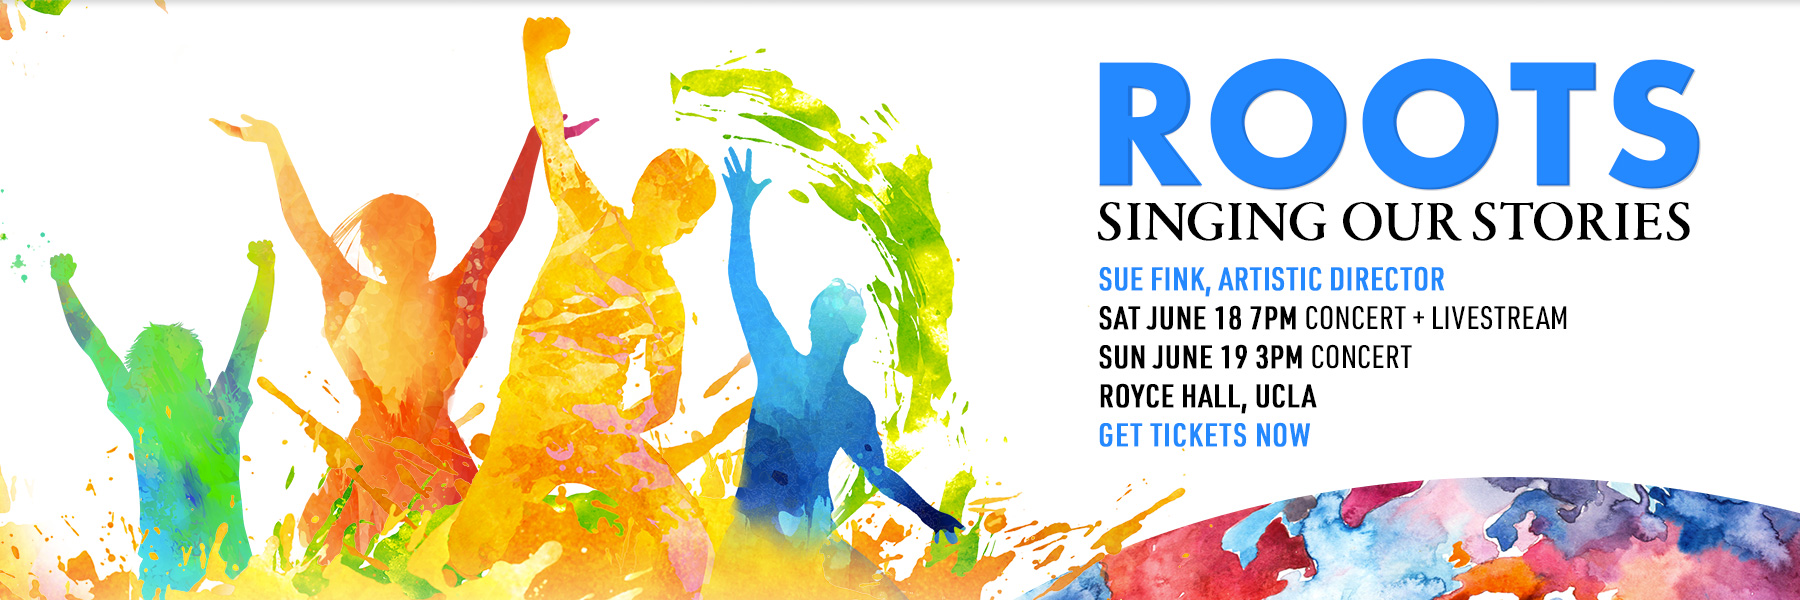 Get tickets for Roots: Singing Our Stories, June 18 and 19, 2022 Royce Hall